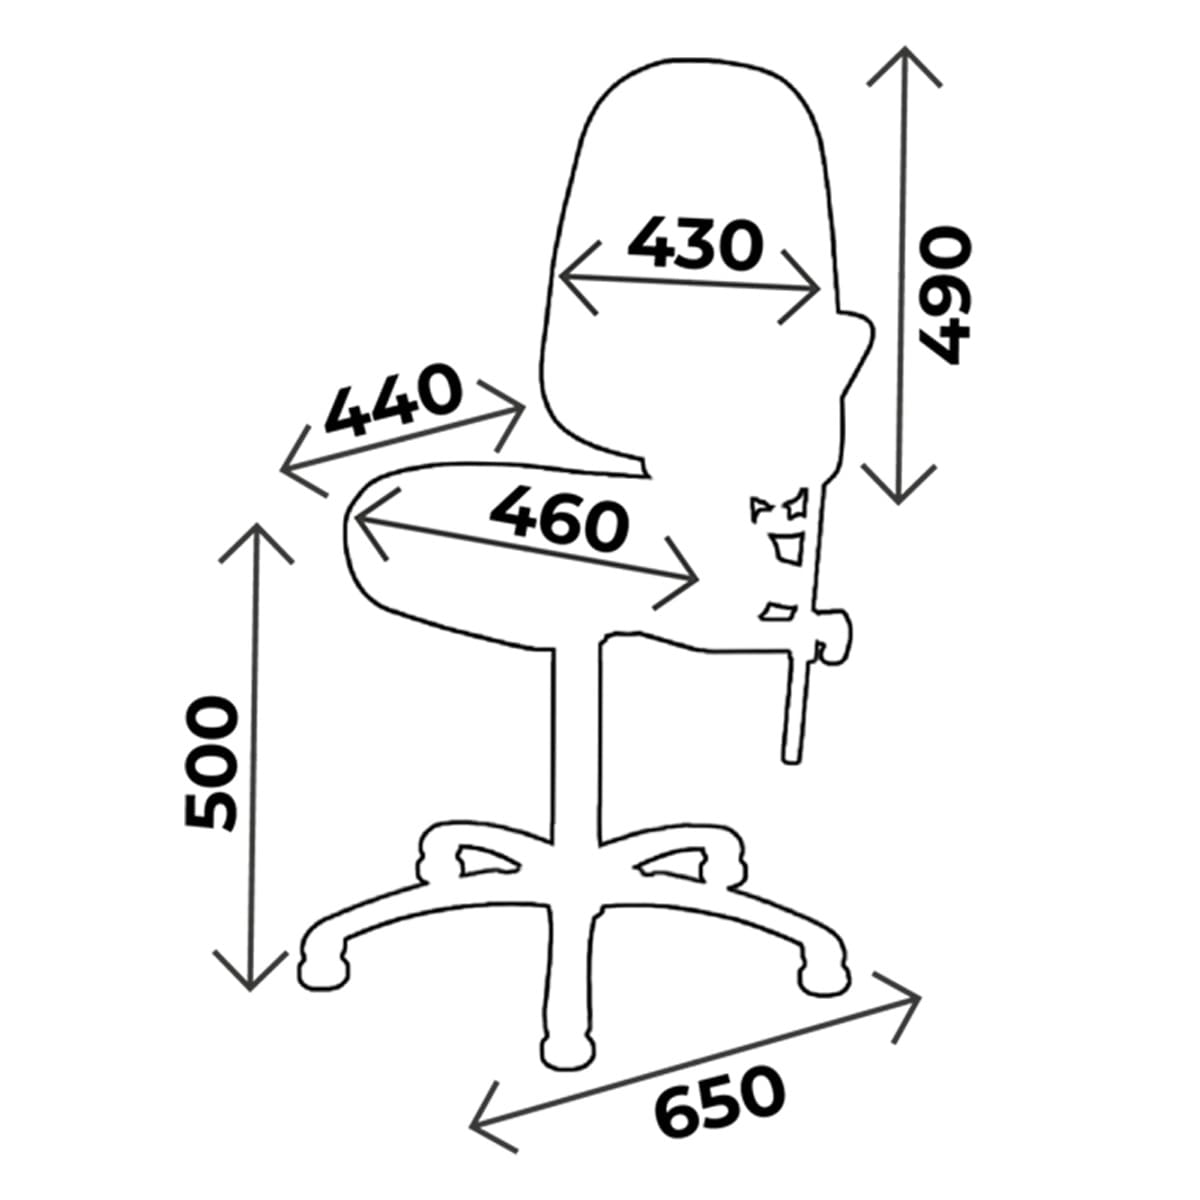 Blood chair height 50cm, 2 sections, non-rotative, with blood test splint